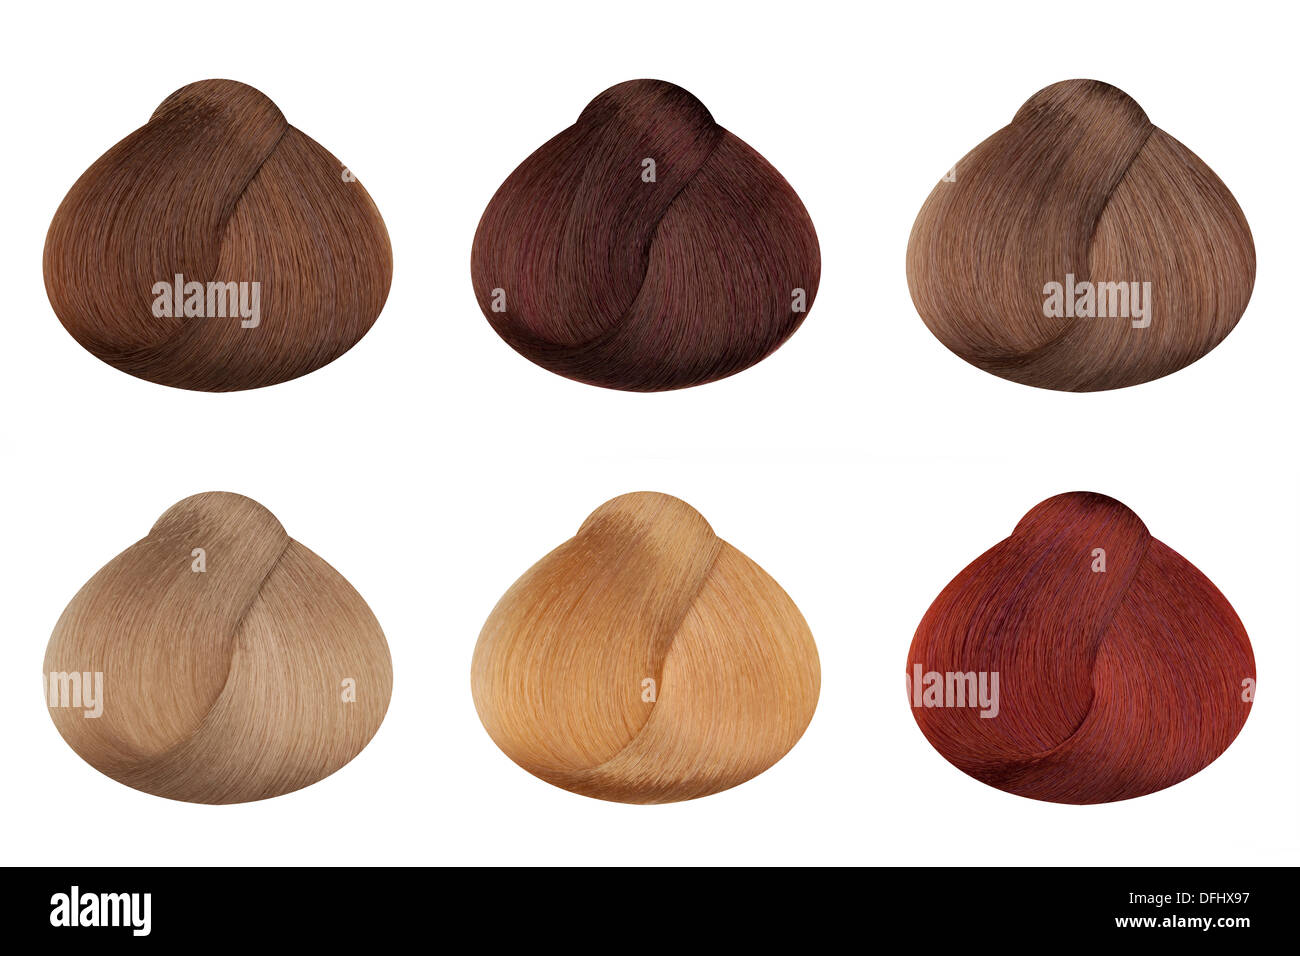 hair samples of different colors Stock Photo